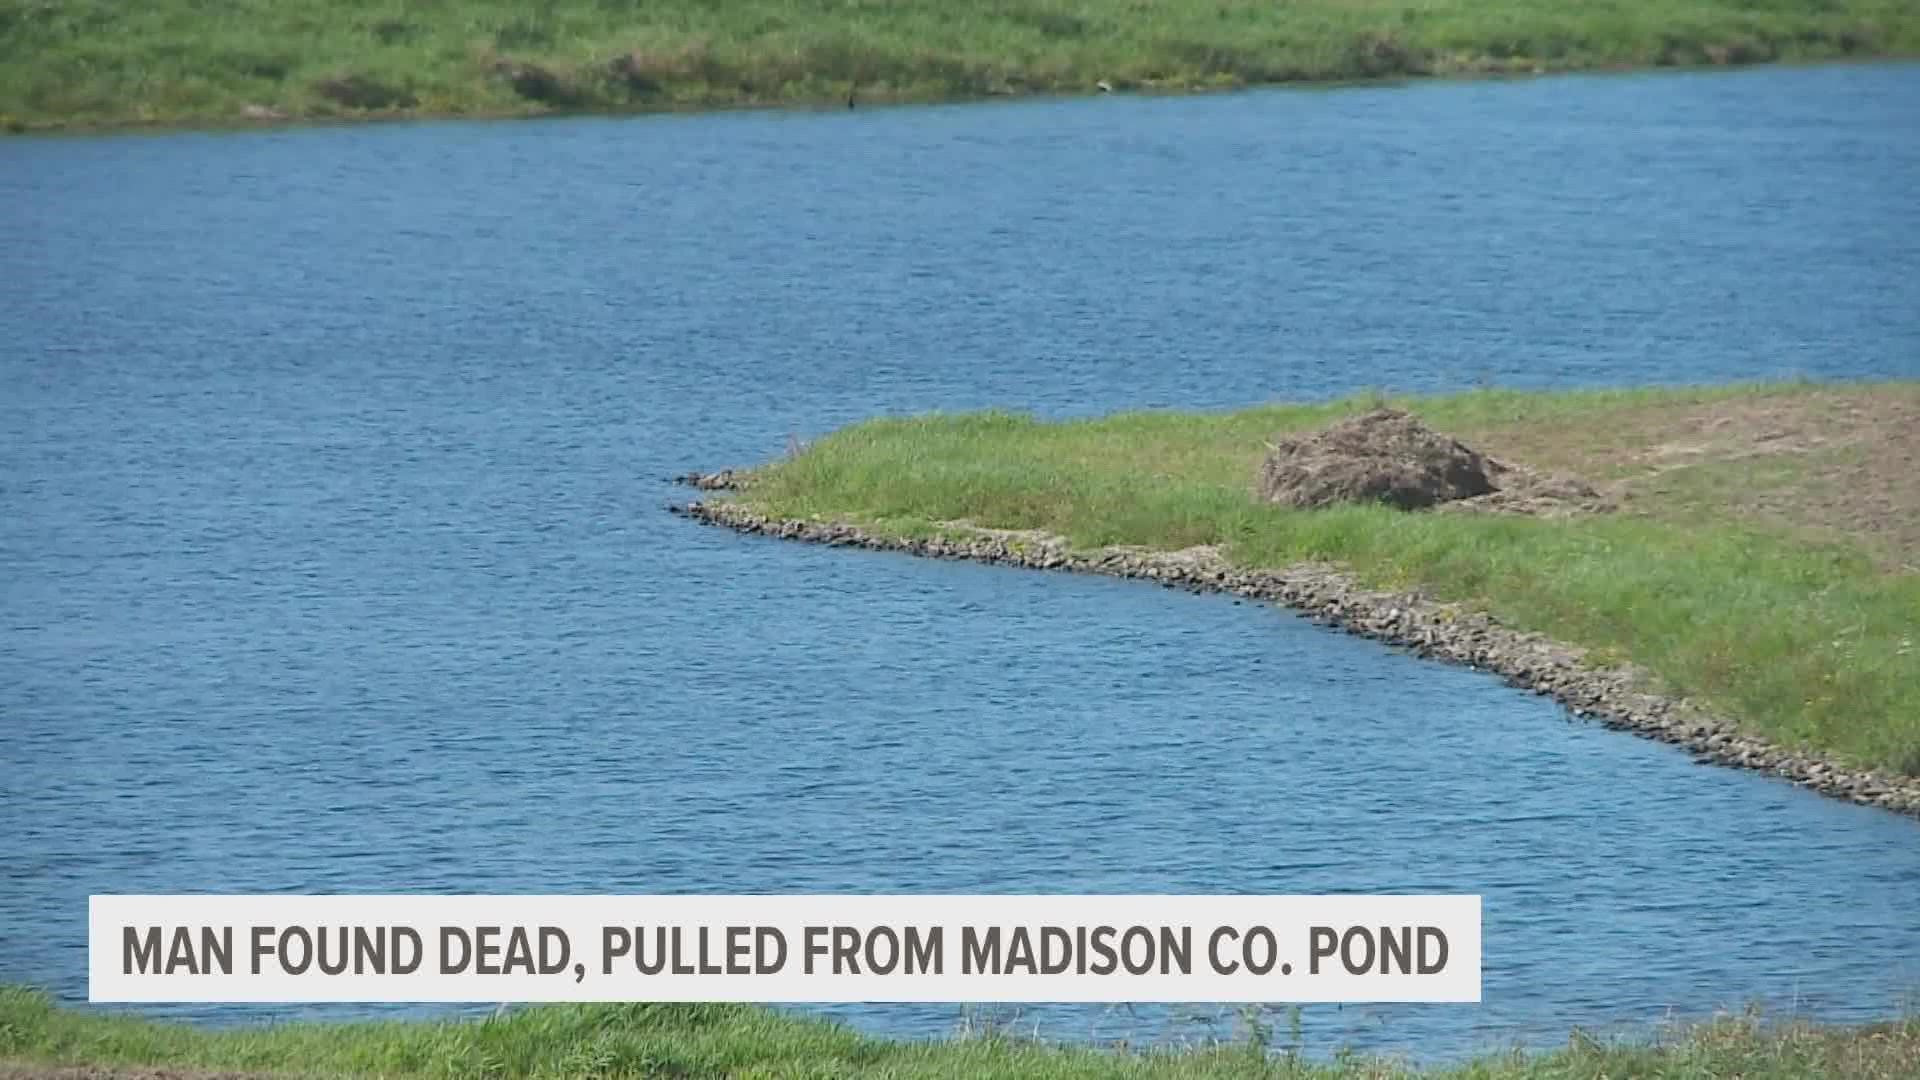 86-year-old Leonard Wolfe was found dead in the pond Thursday. Neighbor Benton McClaran was saddened to hear of his death, saying, "He was a nice guy."